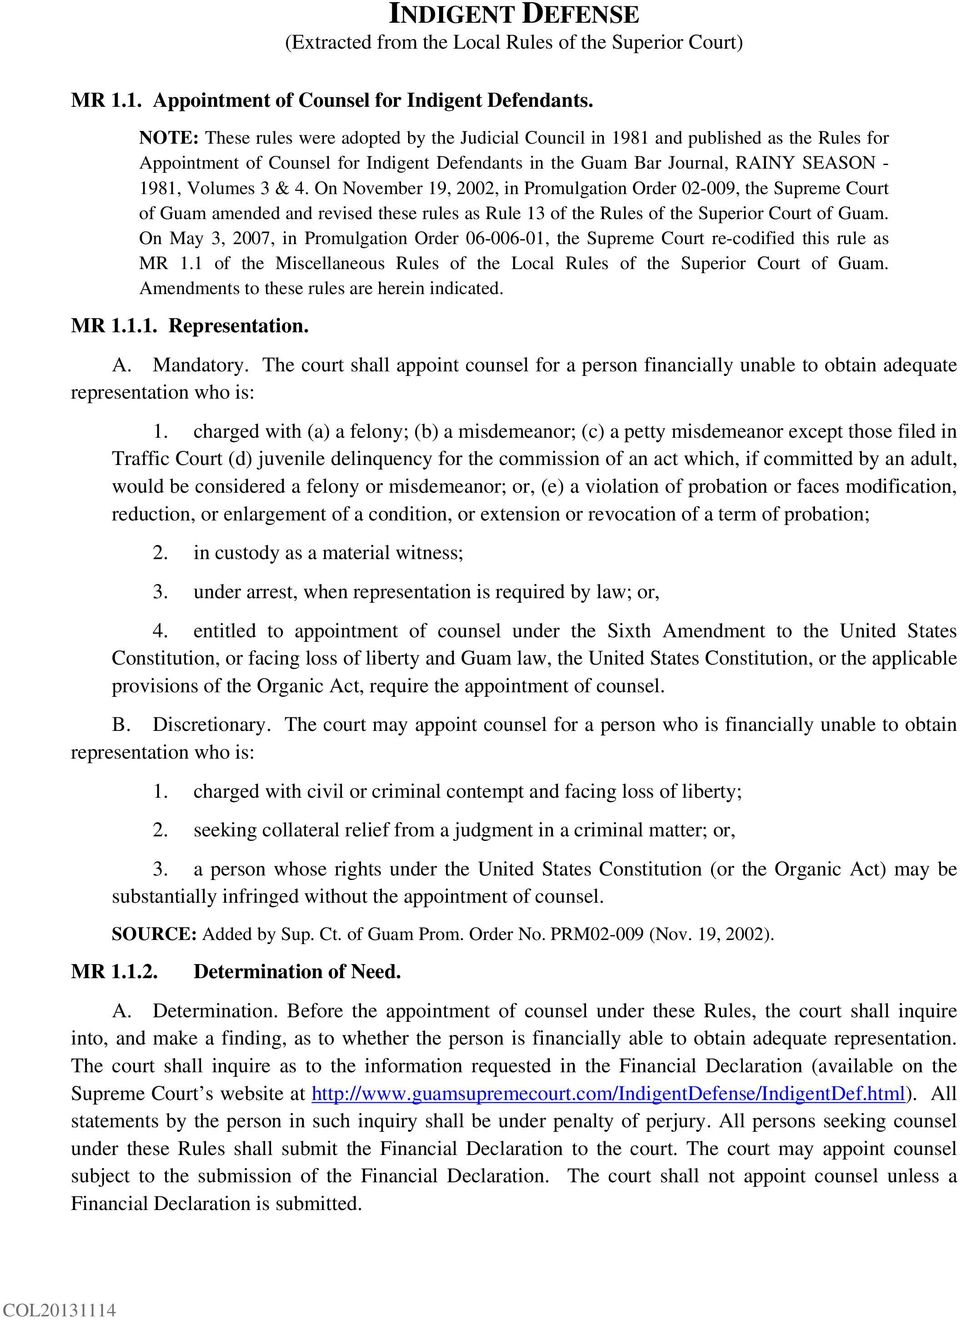 4. On November 19, 2002, in Promulgation Order 02-009, the Supreme Court of Guam amended and revised these rules as Rule 13 of the Rules of the Superior Court of Guam.